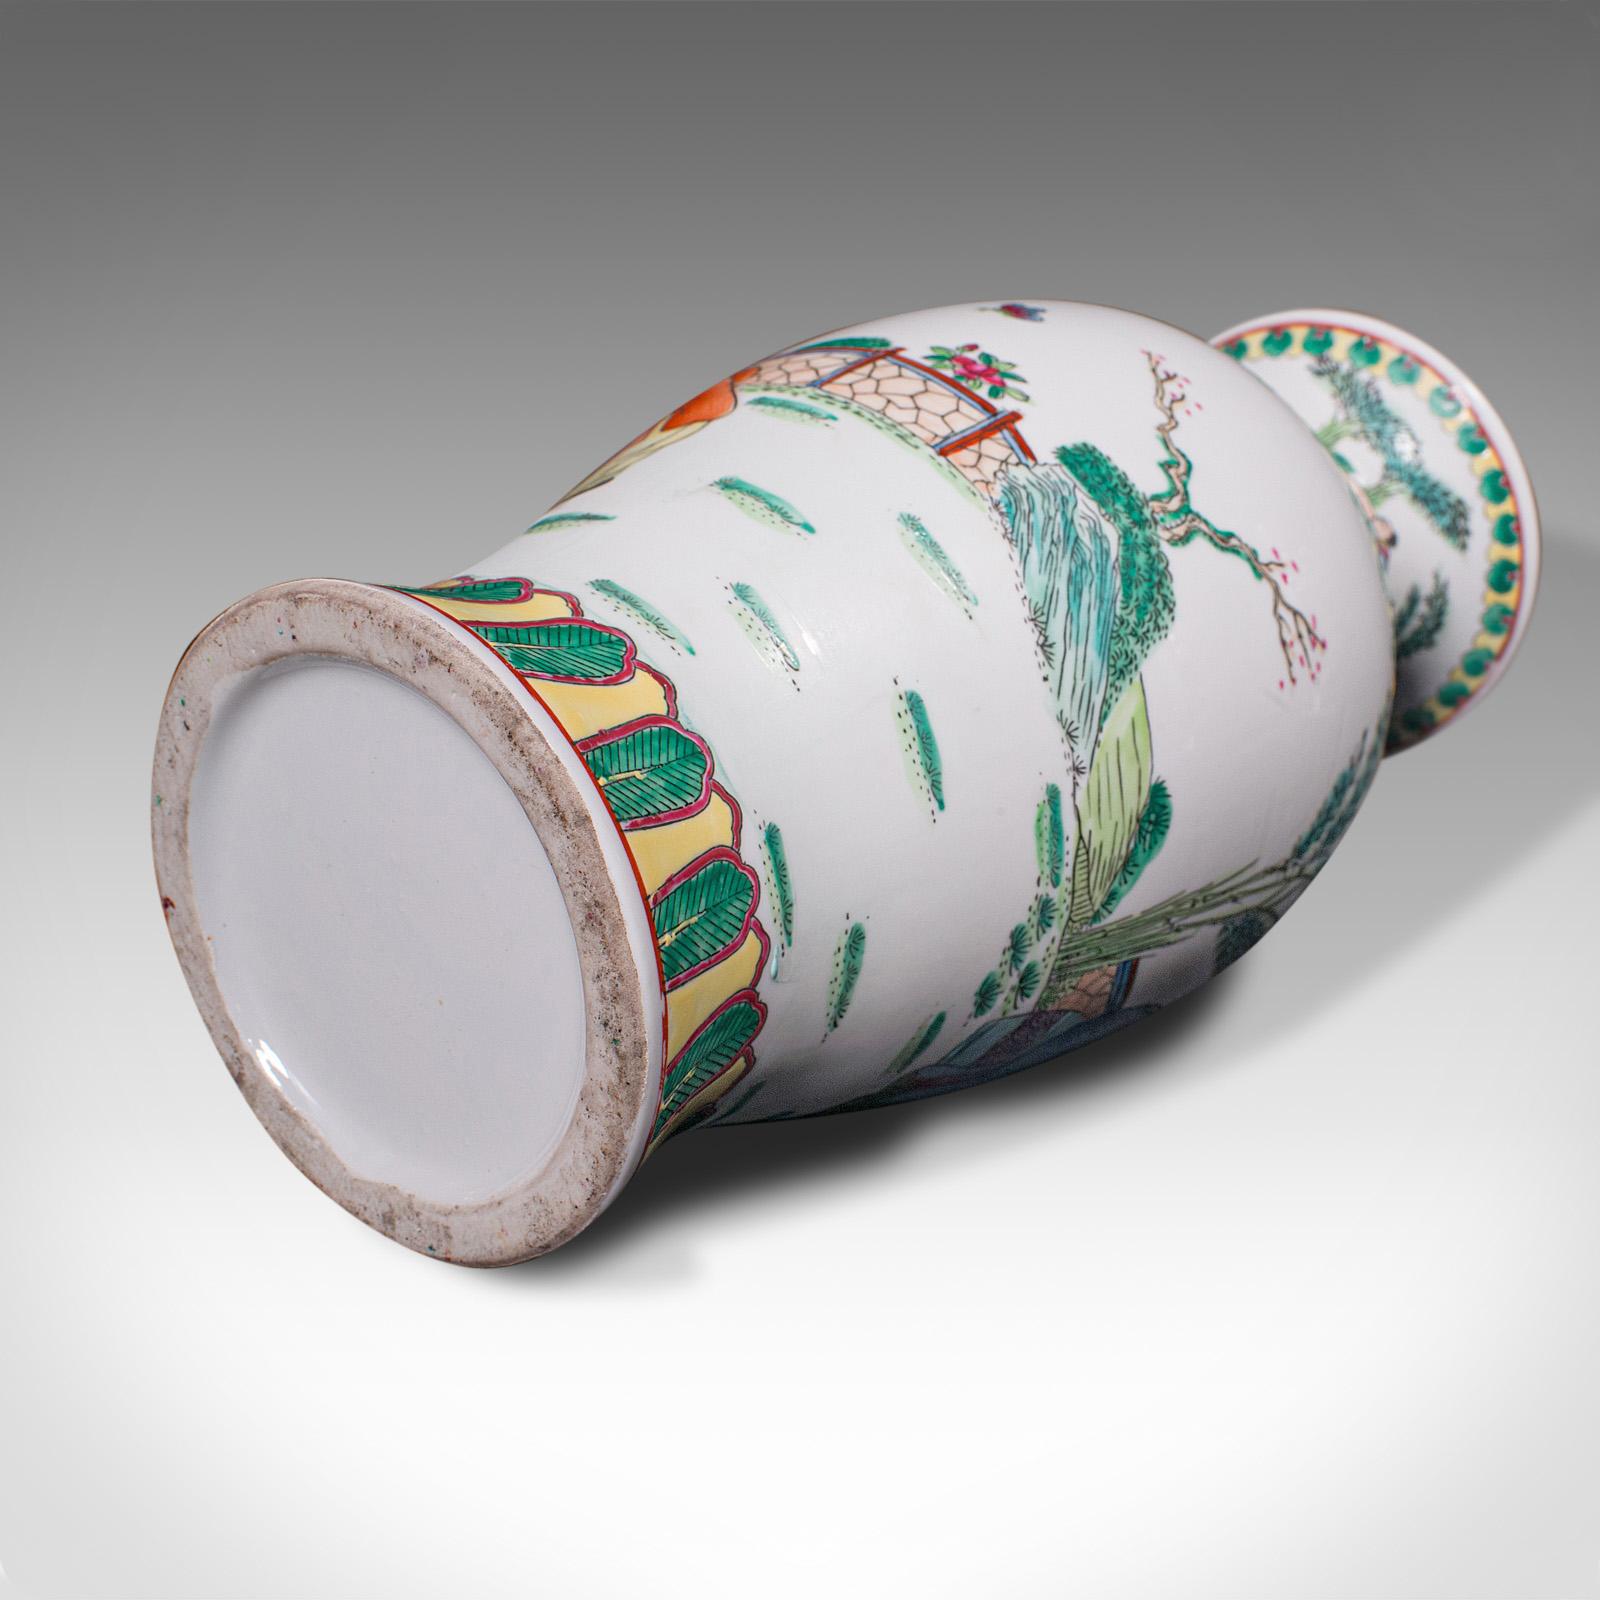 Antique Posy Vase, Chinese, Ceramic, Baluster, Hand Painted, Victorian, C.1900 For Sale 7